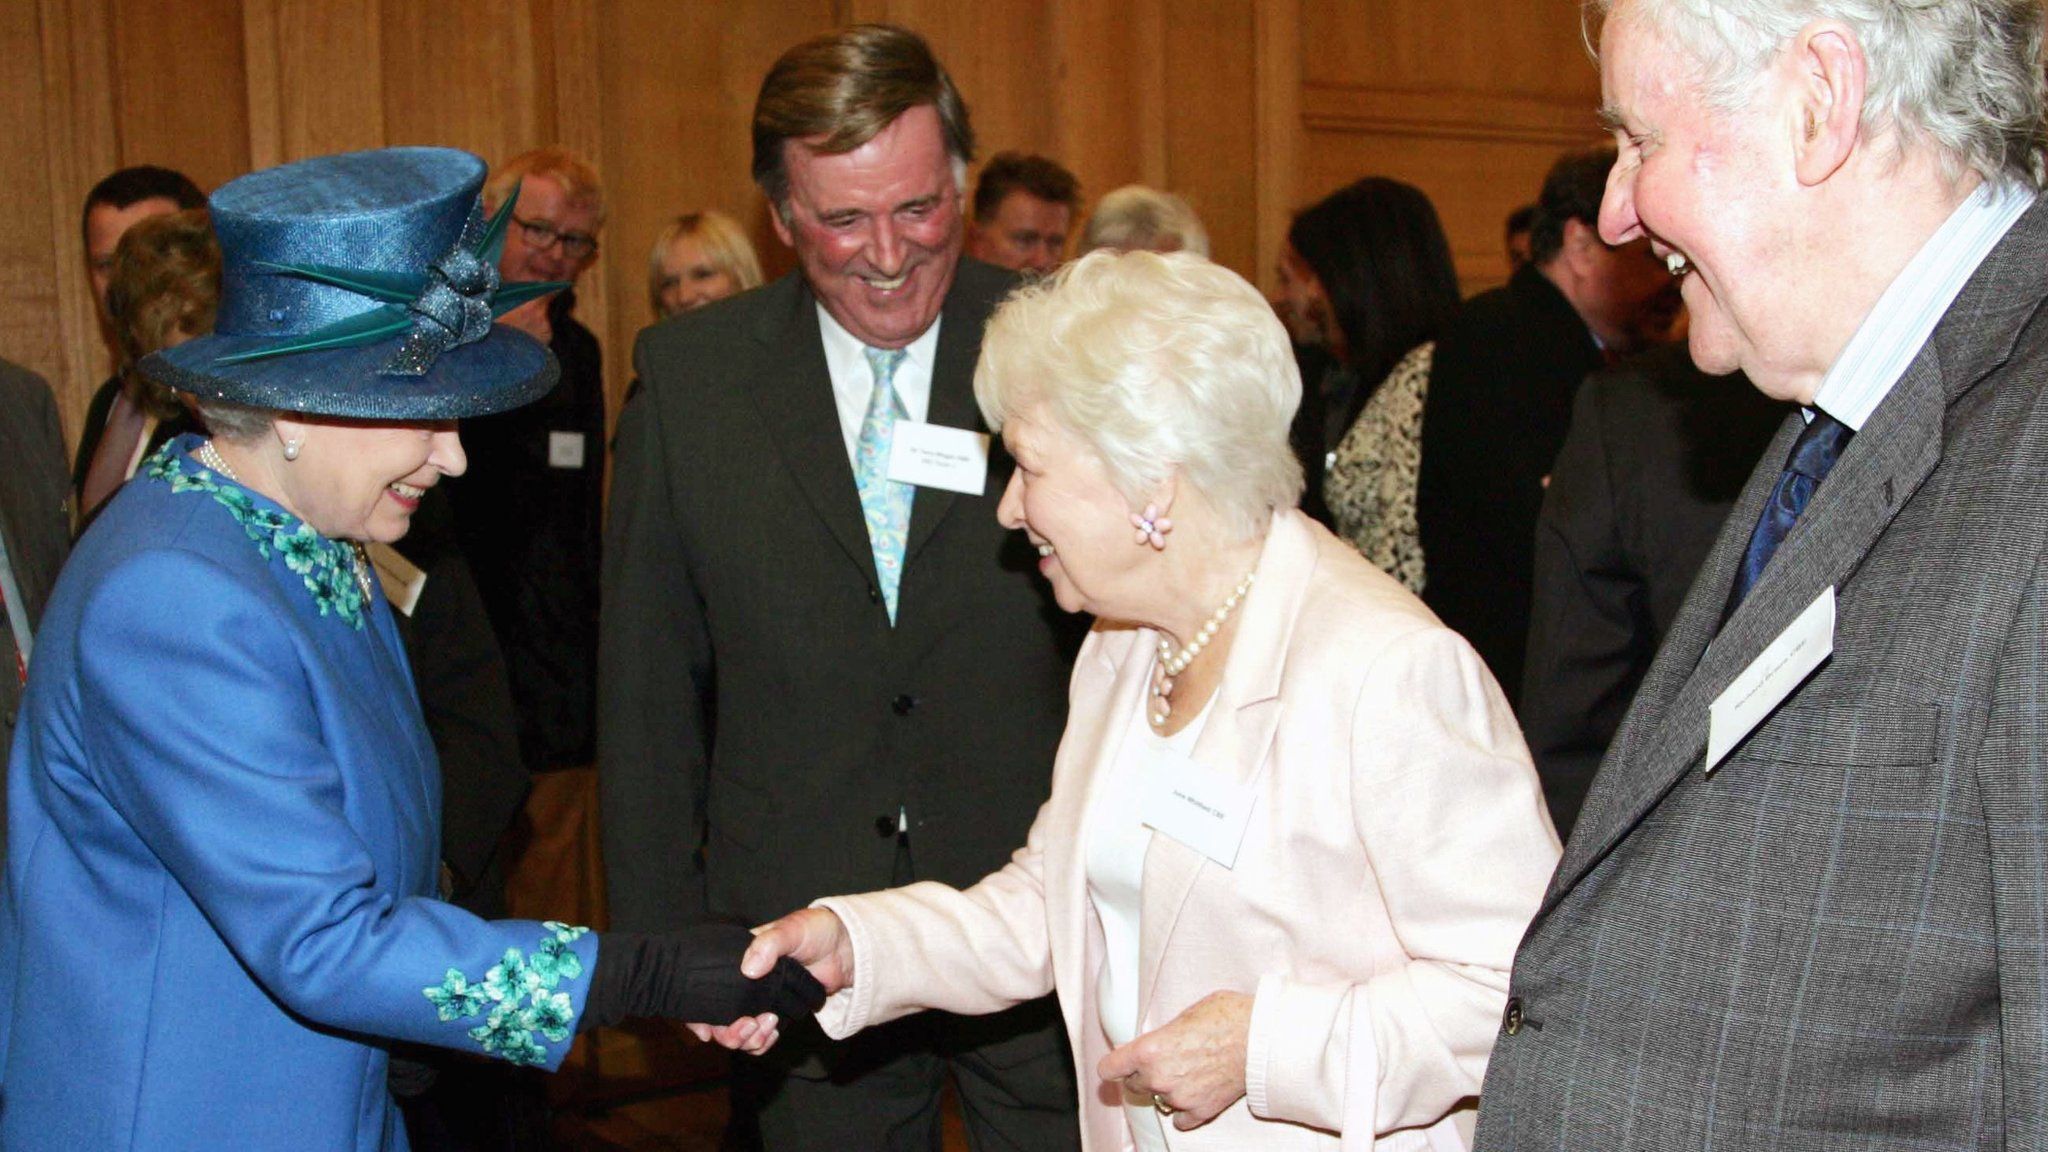 June Whitfield shakes hands with the Queen